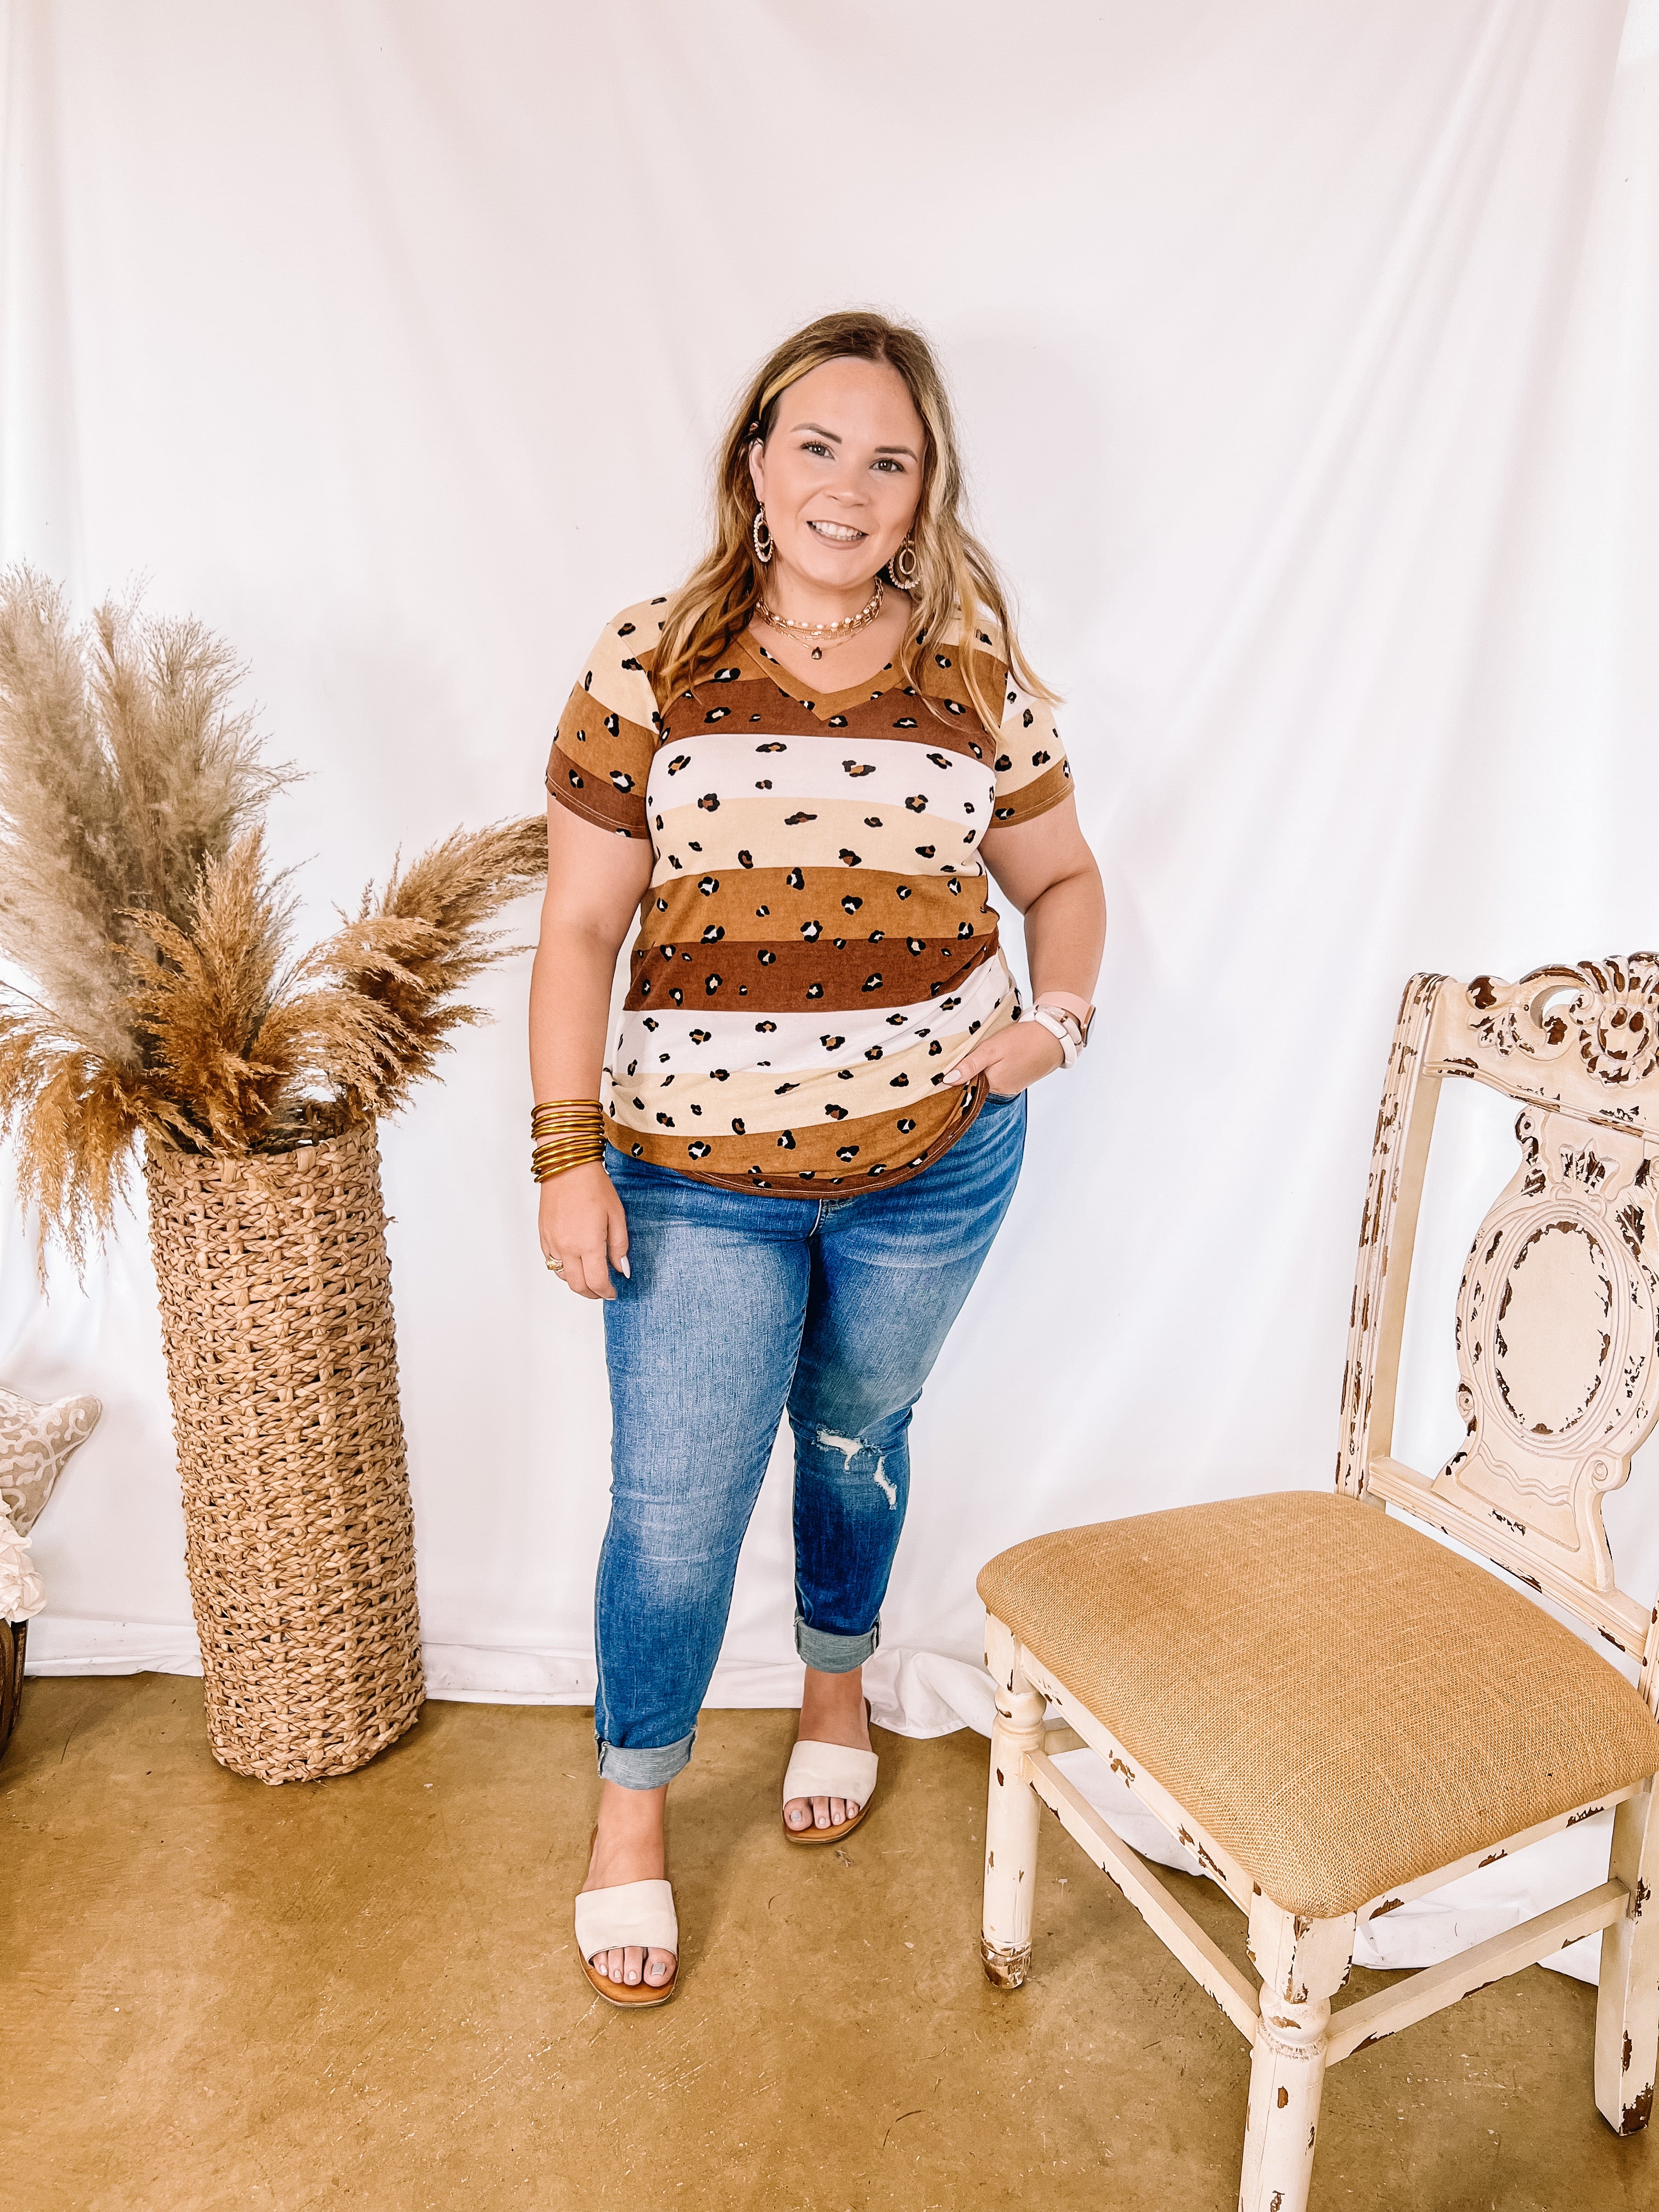 Keep Things Simple V Neck Striped and Animal Print Short Sleeve Tee Shirt in Brown Mix - Giddy Up Glamour Boutique